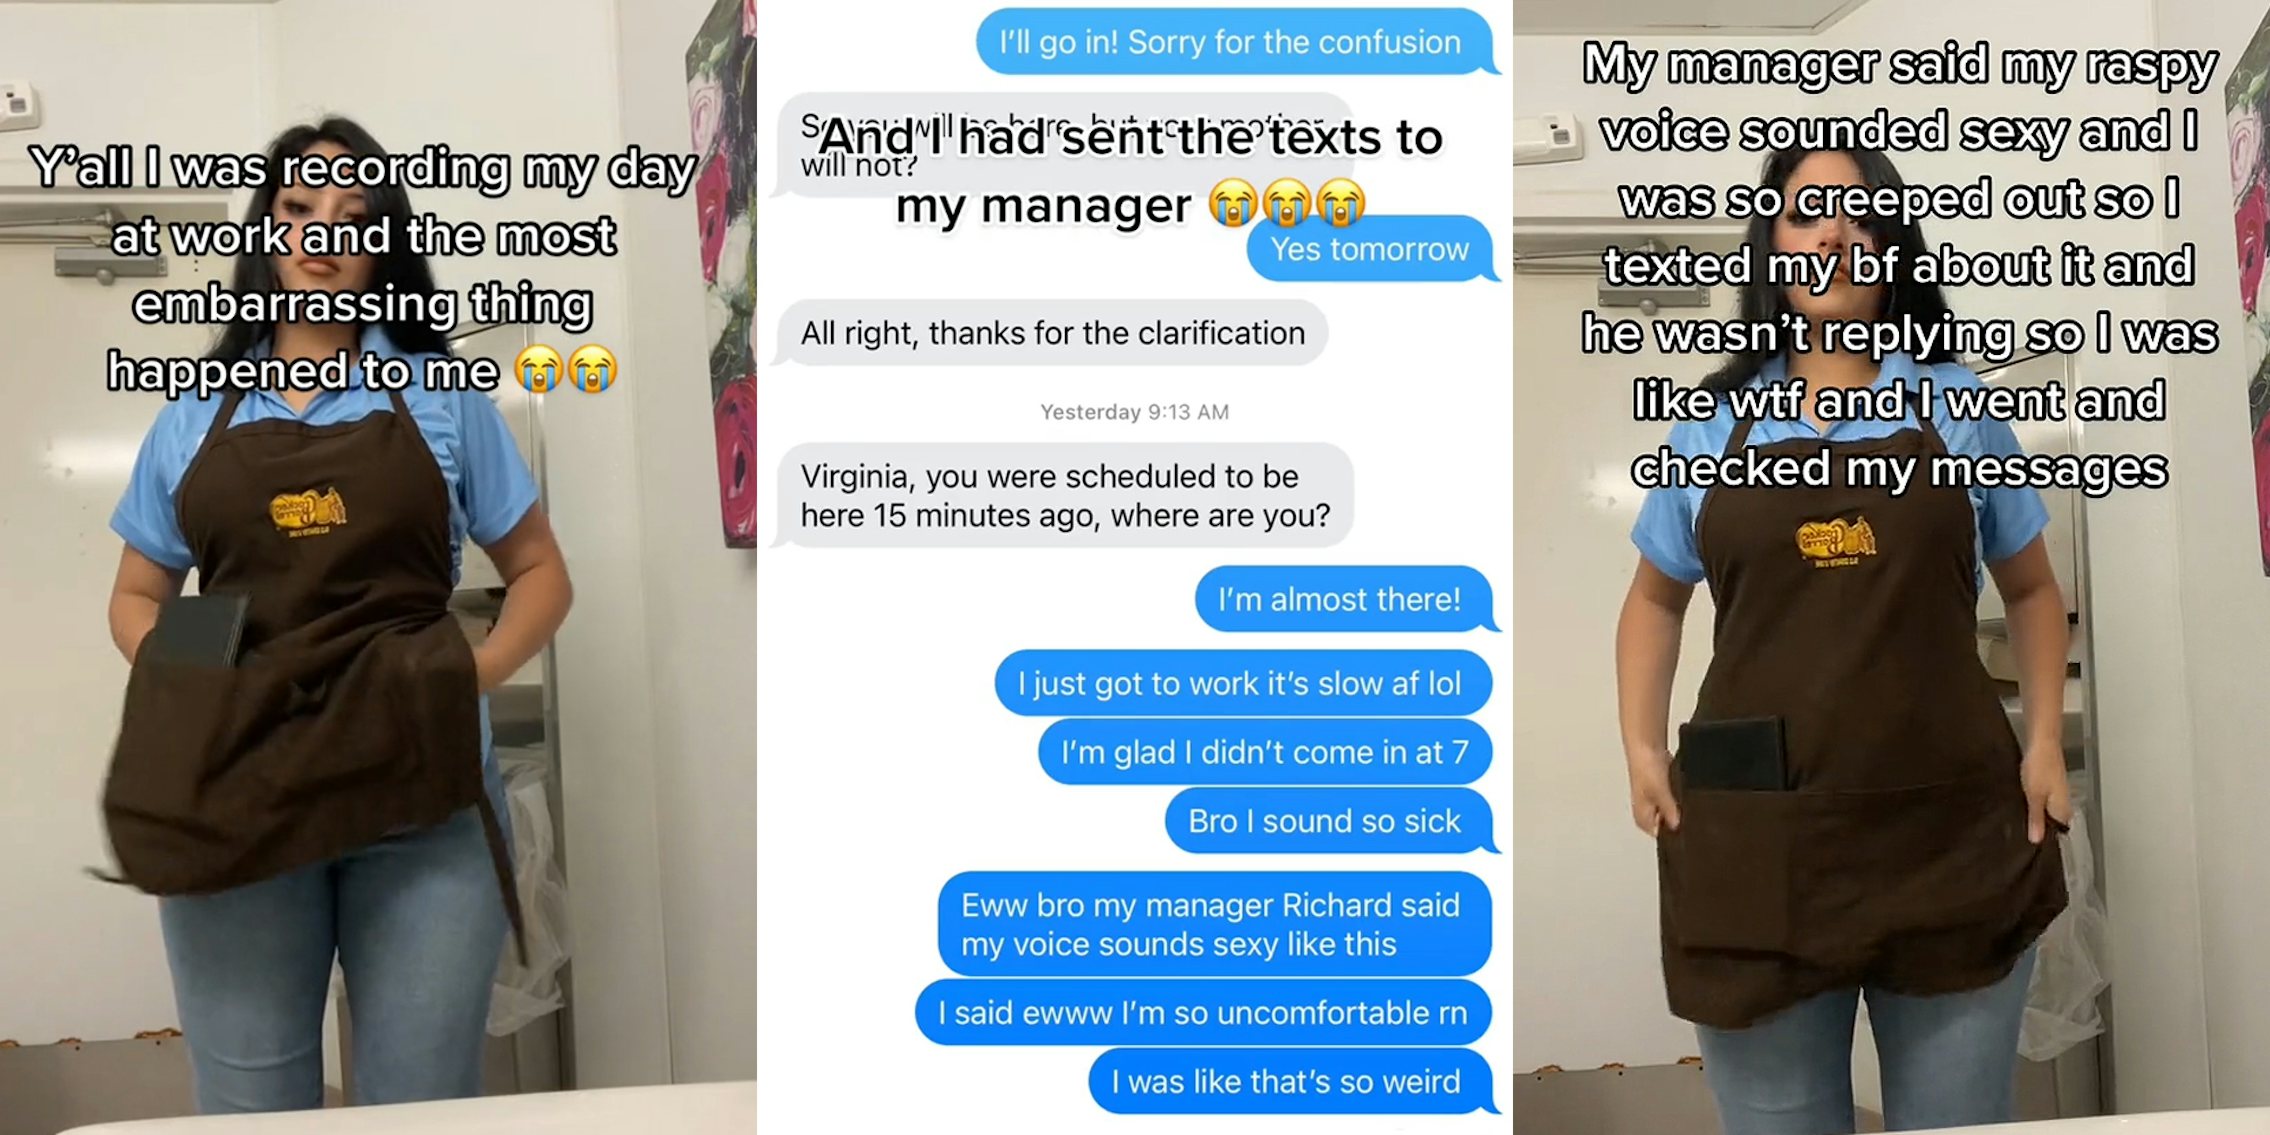 Cracker Barrel waitress inbathroom caption 'Y'all I was recording my day at work and the most embarrassing thing happened to me' (l) Text messages 'Virginia, you were scheduled to be here 15 min ago, where are you? I'm almost there! I just got to work it's slow af lol I'm glad I didn't come in at 7 Bro I sound so sick Eww bro my manager Richard said my voice sounds sexy like this I said ewwww I'm so uncomfortable rn I was like that's so weird' (c) Cracker Barrel waitress in bathroom caption 'My manager said my raspy voice sounded sexy and I was so creeped out so I texted my bf about it and he wasn't replying so I was like wtf and I went and check my messages' (r)